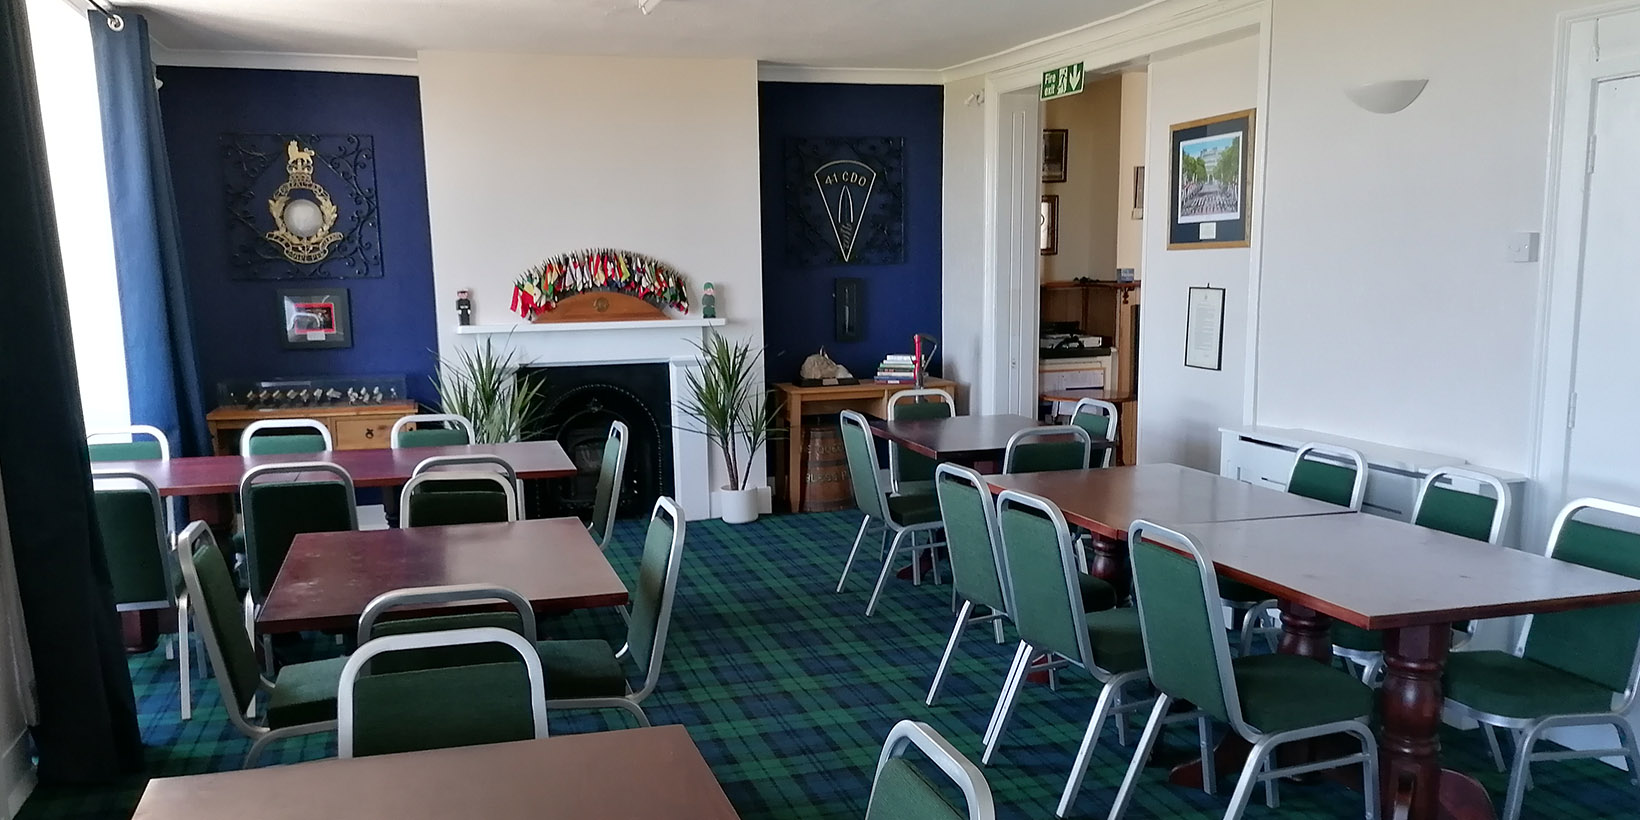 Function Room for Hire in Deal, Walmer, Kent - Gibraltar Room